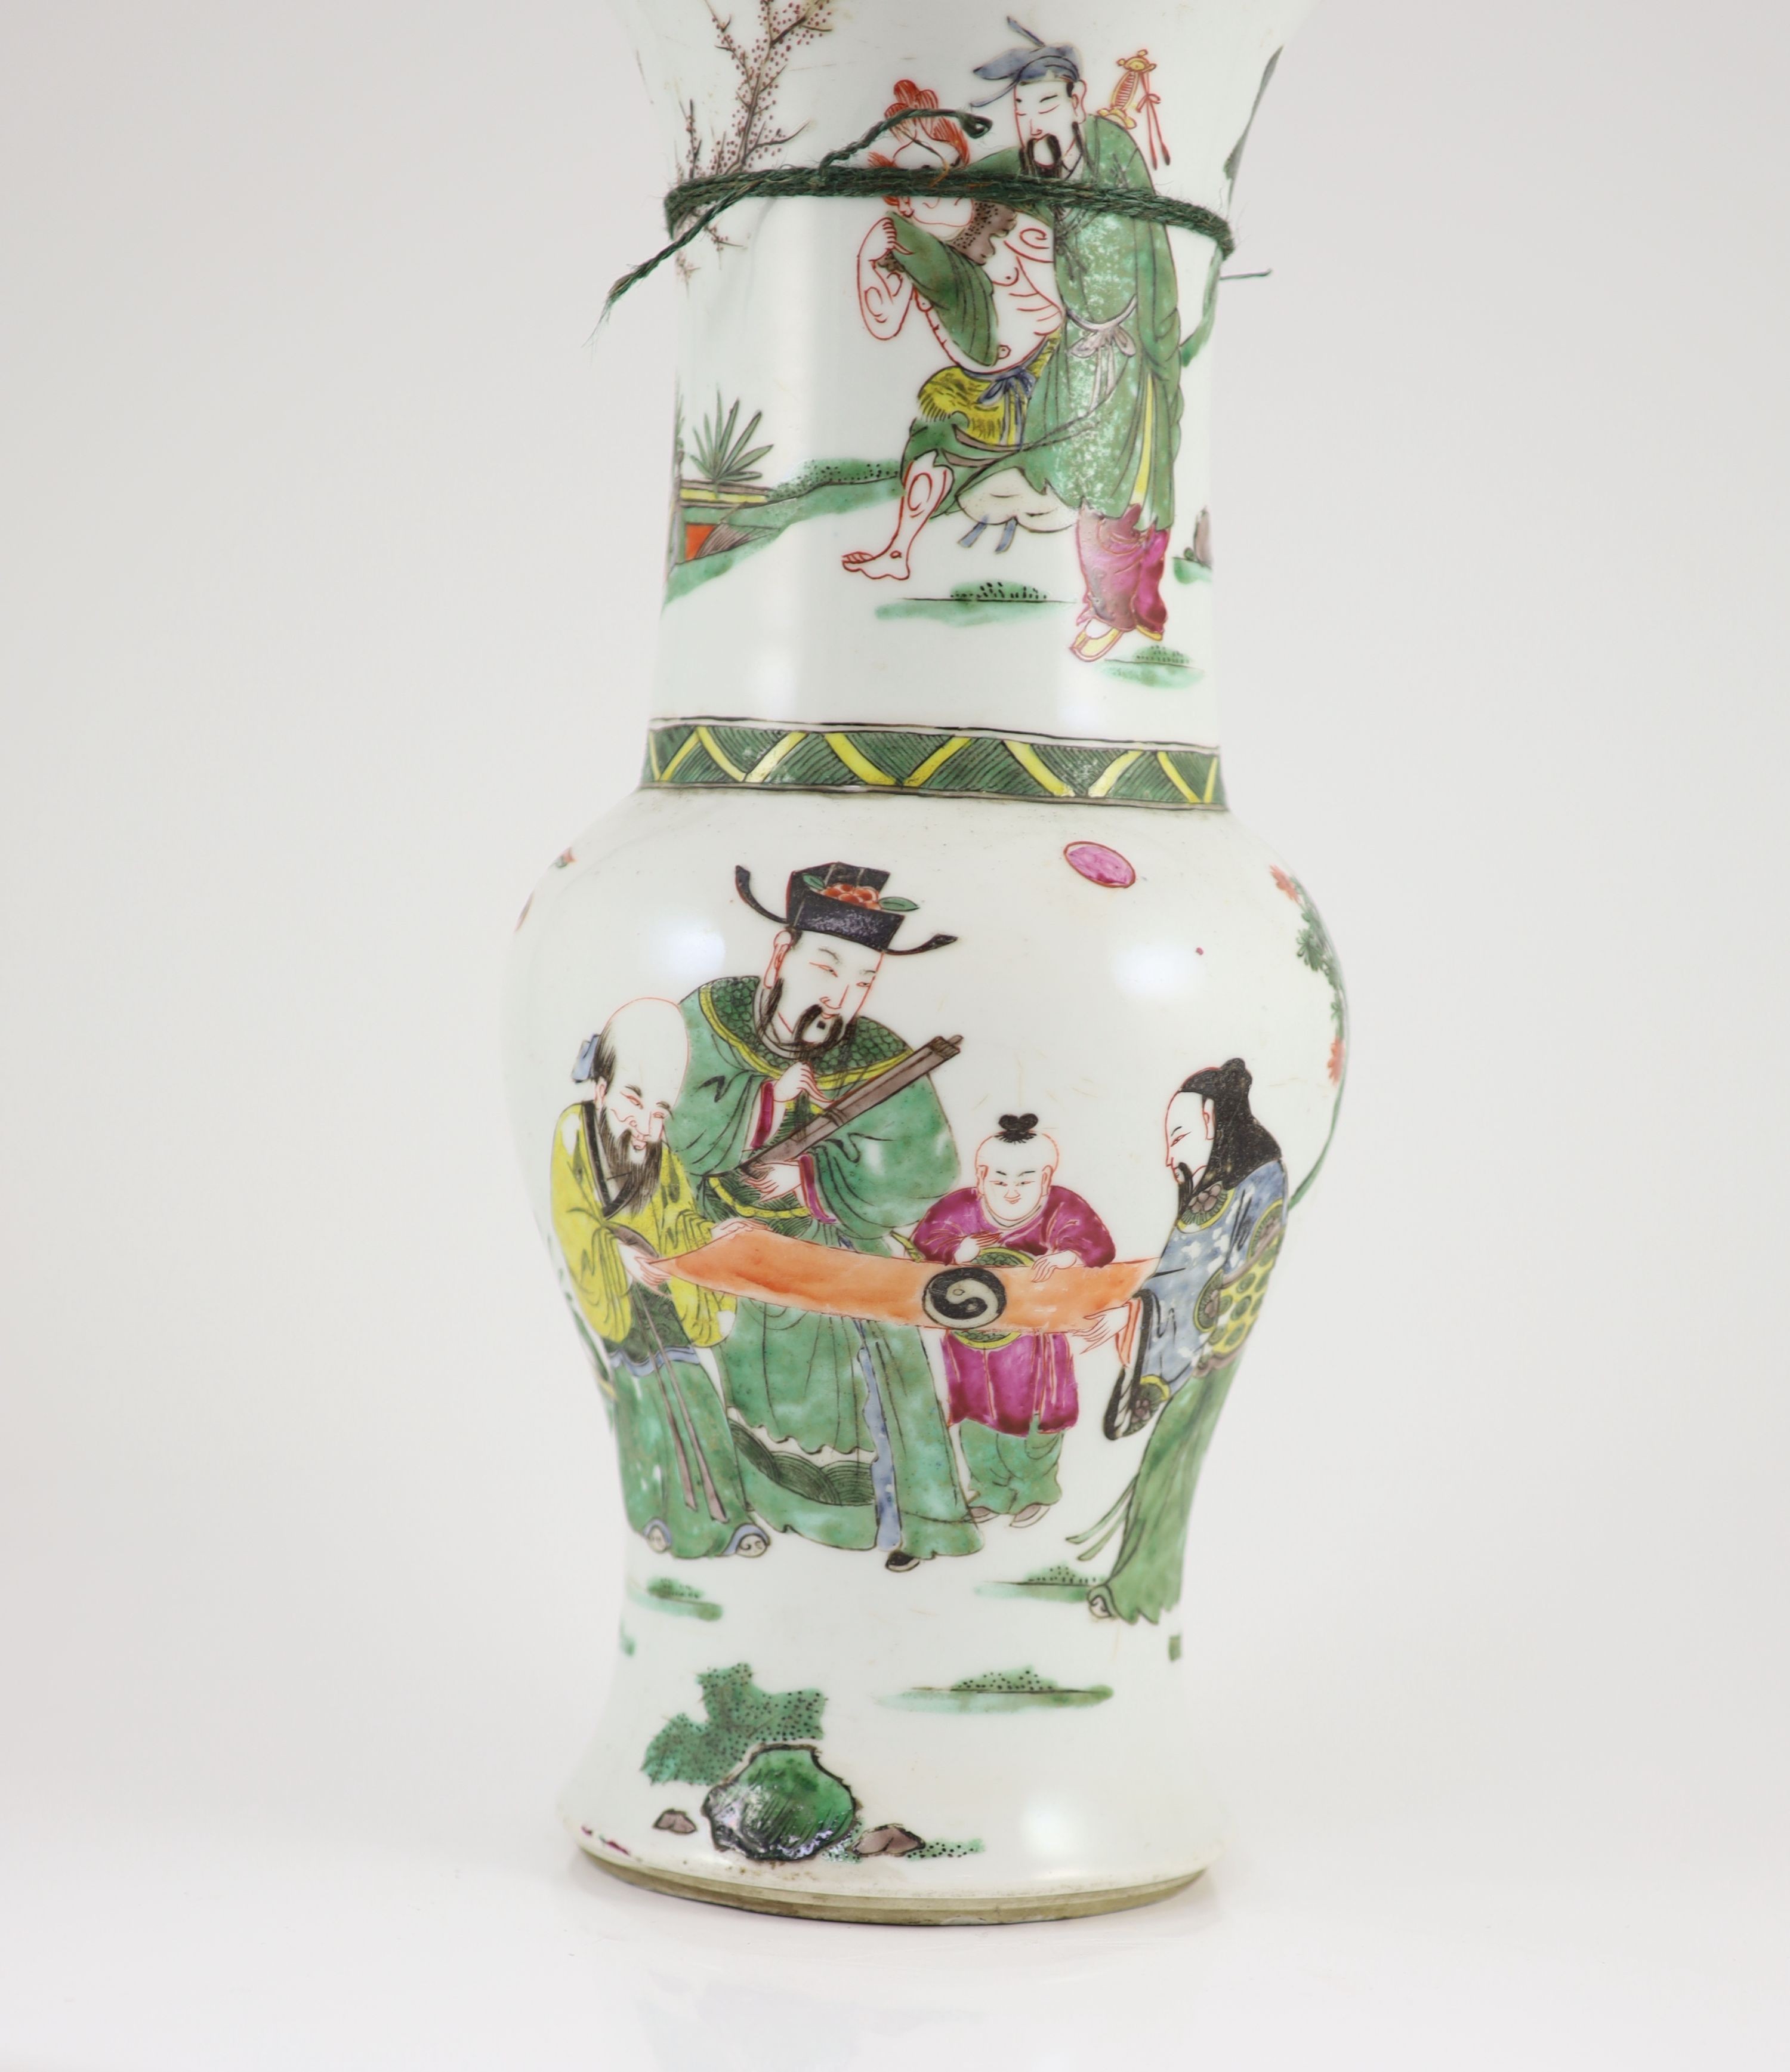 A Chinese famille rose yen-yen vase, Yongzheng period (1723-35), 40.5 cm high, damage and reduced neck